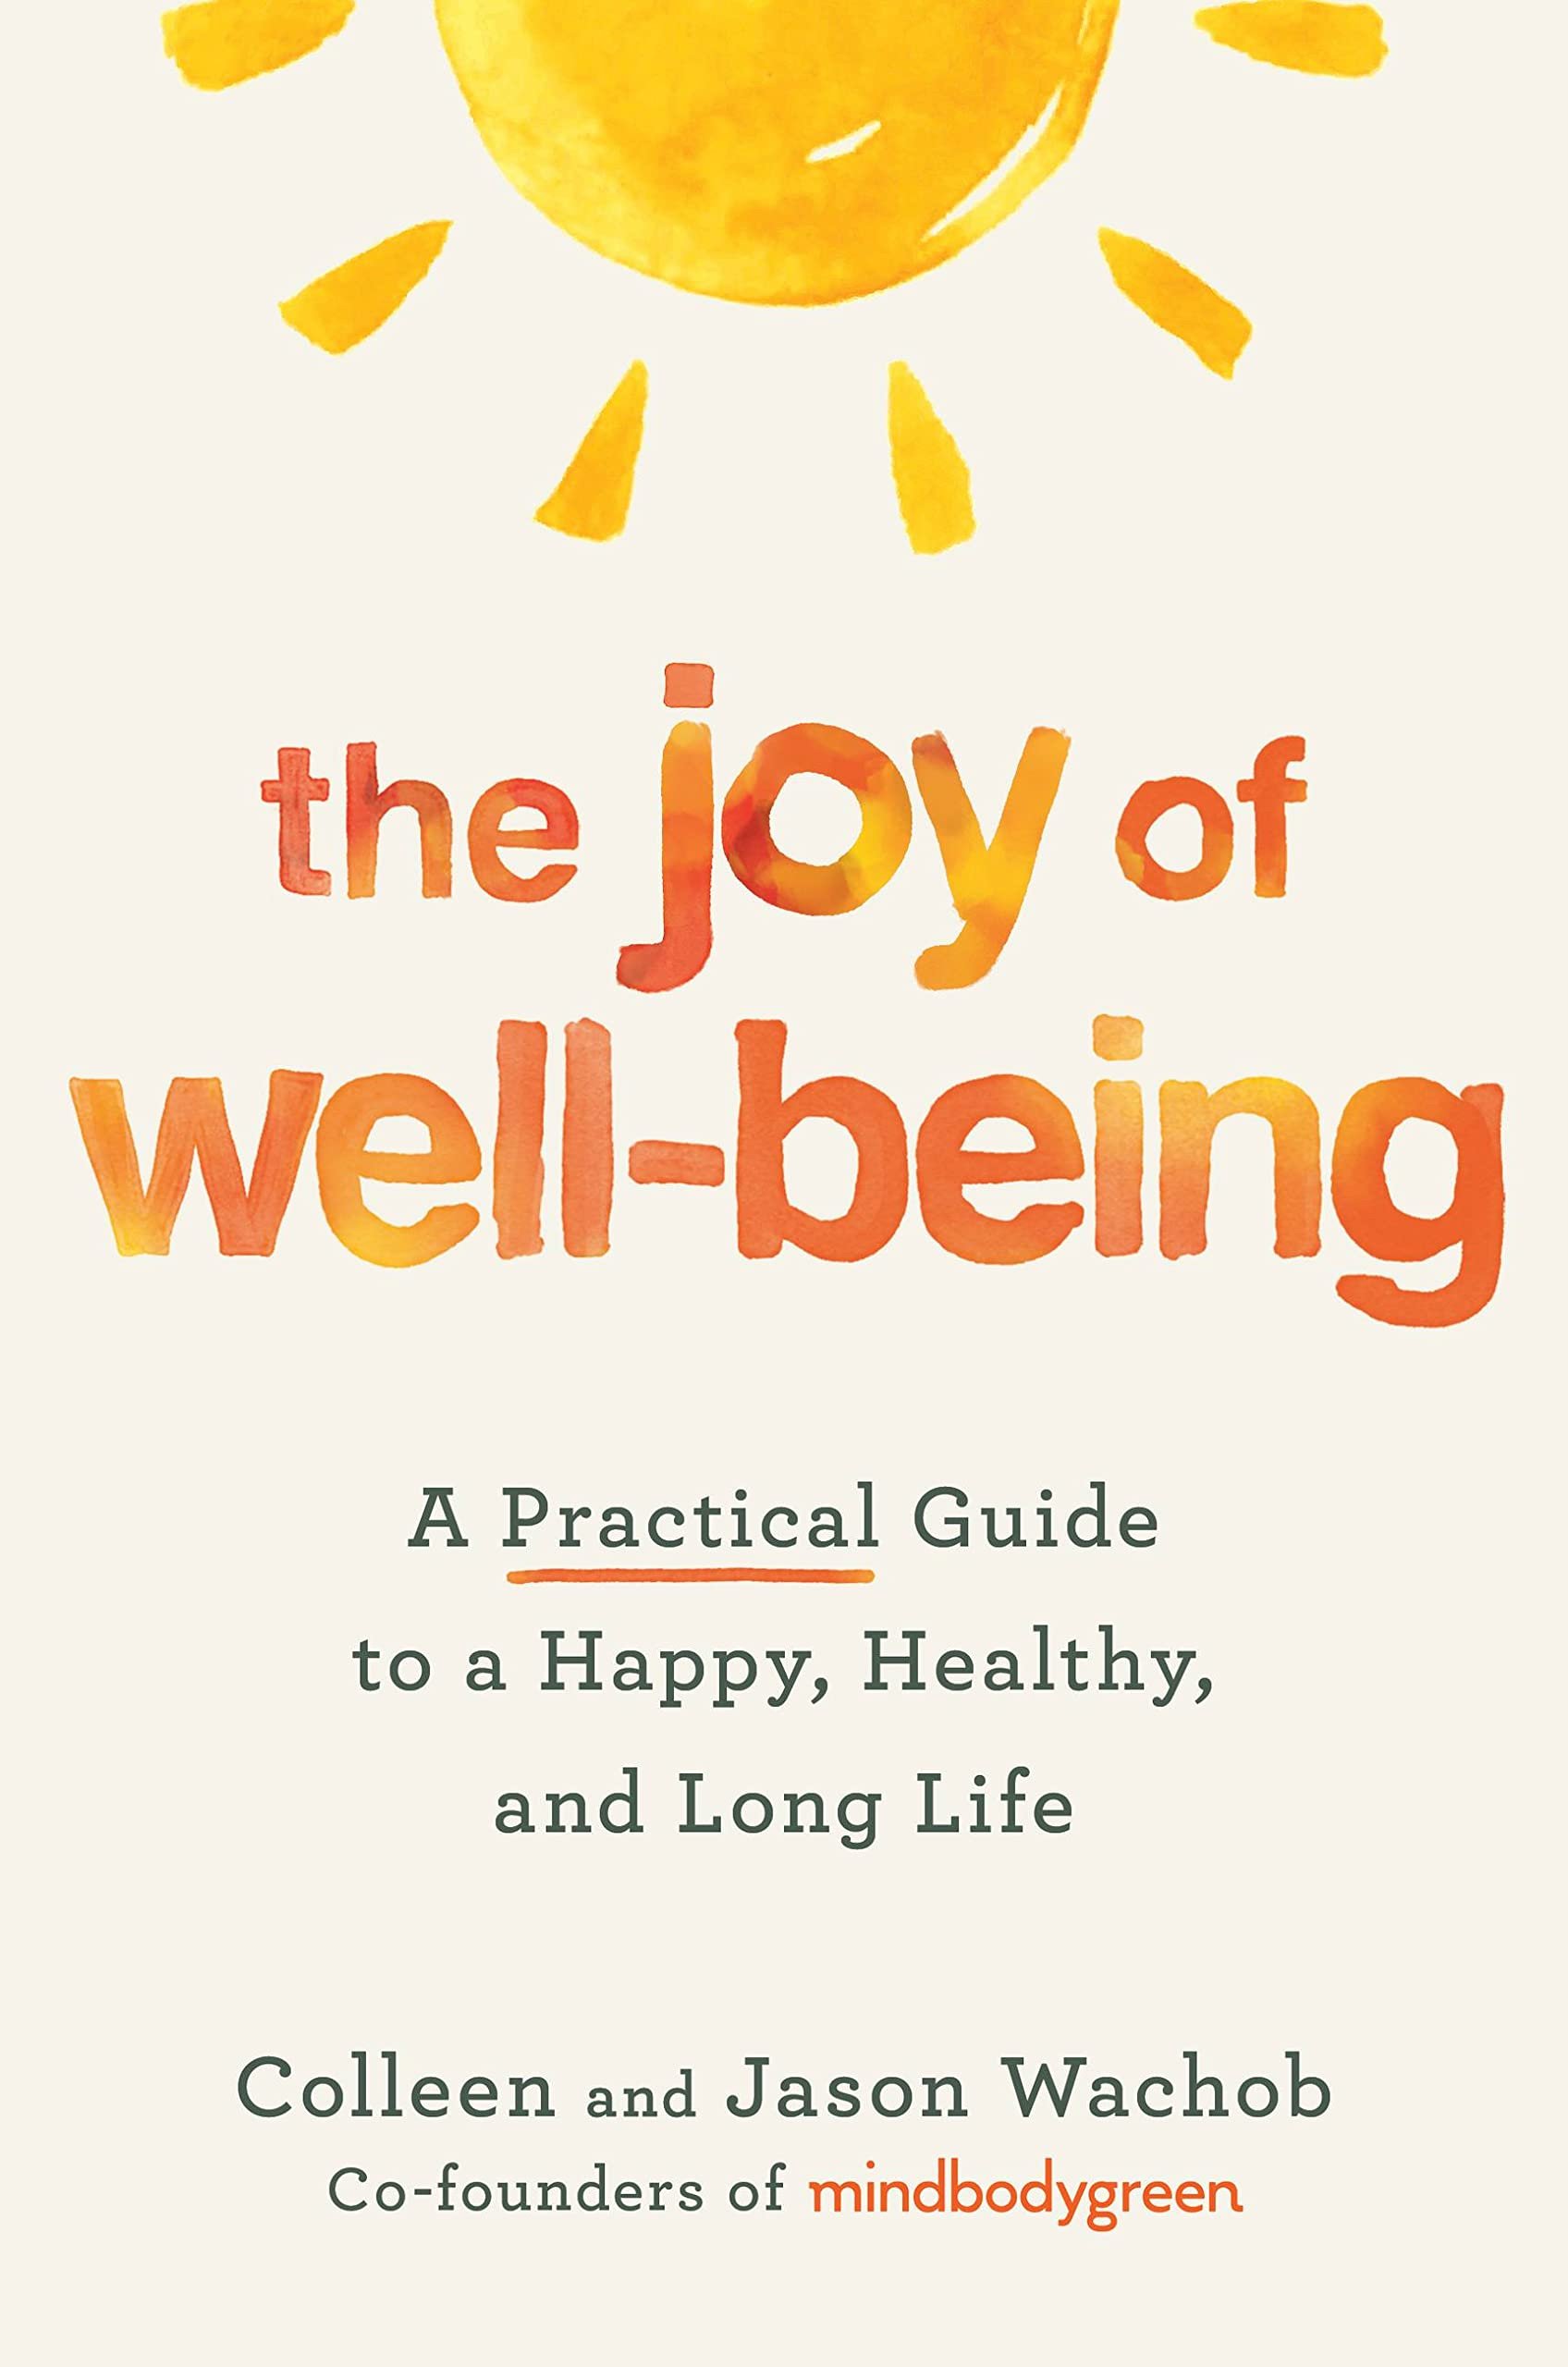 Joy-of-Well-Being-A-Practical-Guide-to-a-Happy-Healthy-Long-Life-Colleen-Jason-Wachob-Mindbodygreen-Book-Cover.jpg